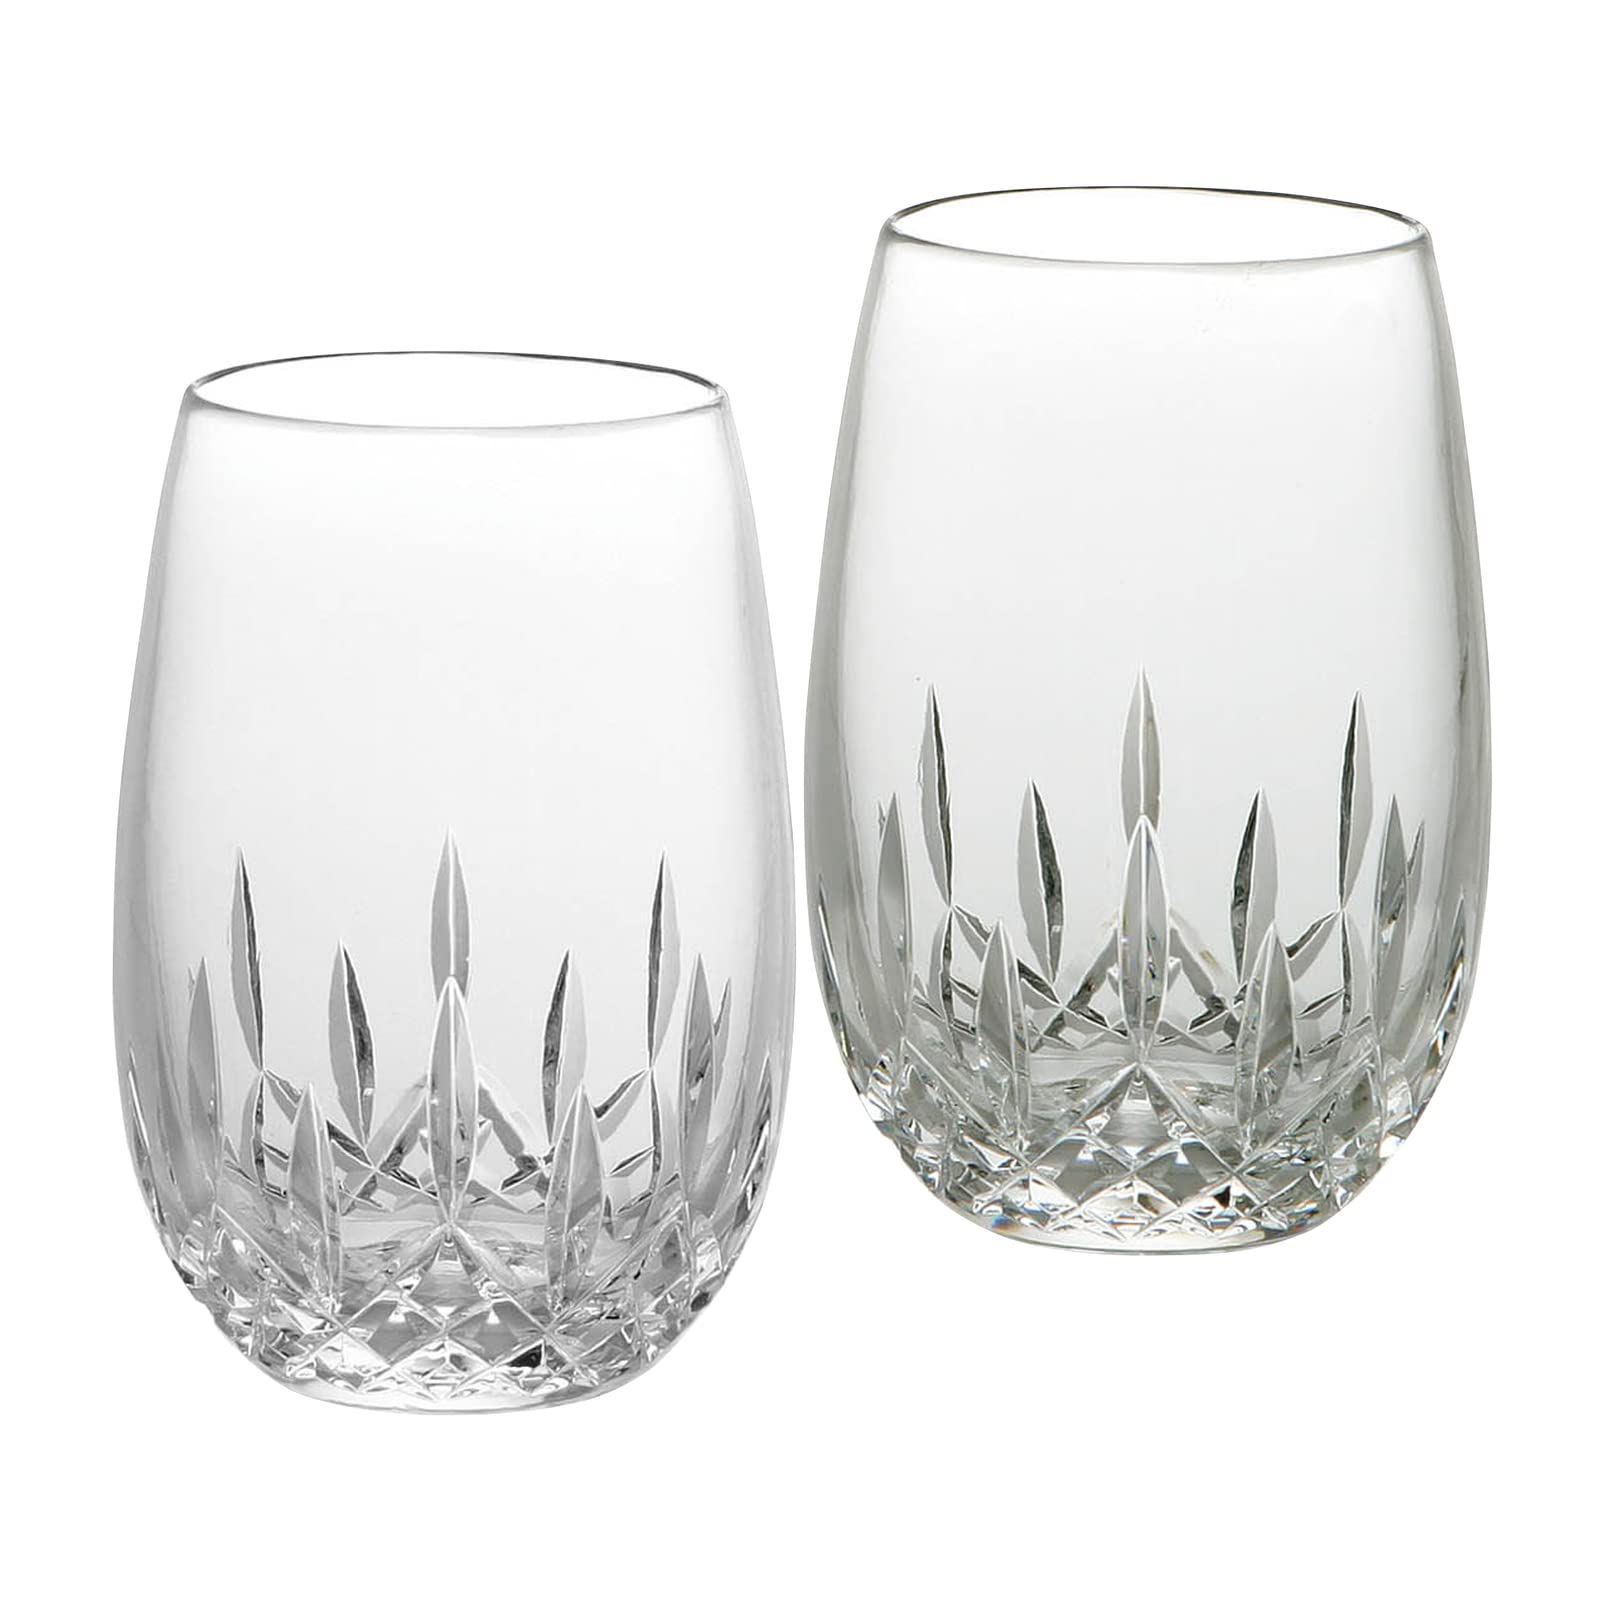 Waterford Lismore Essence Stemless White Wine, Set of 2